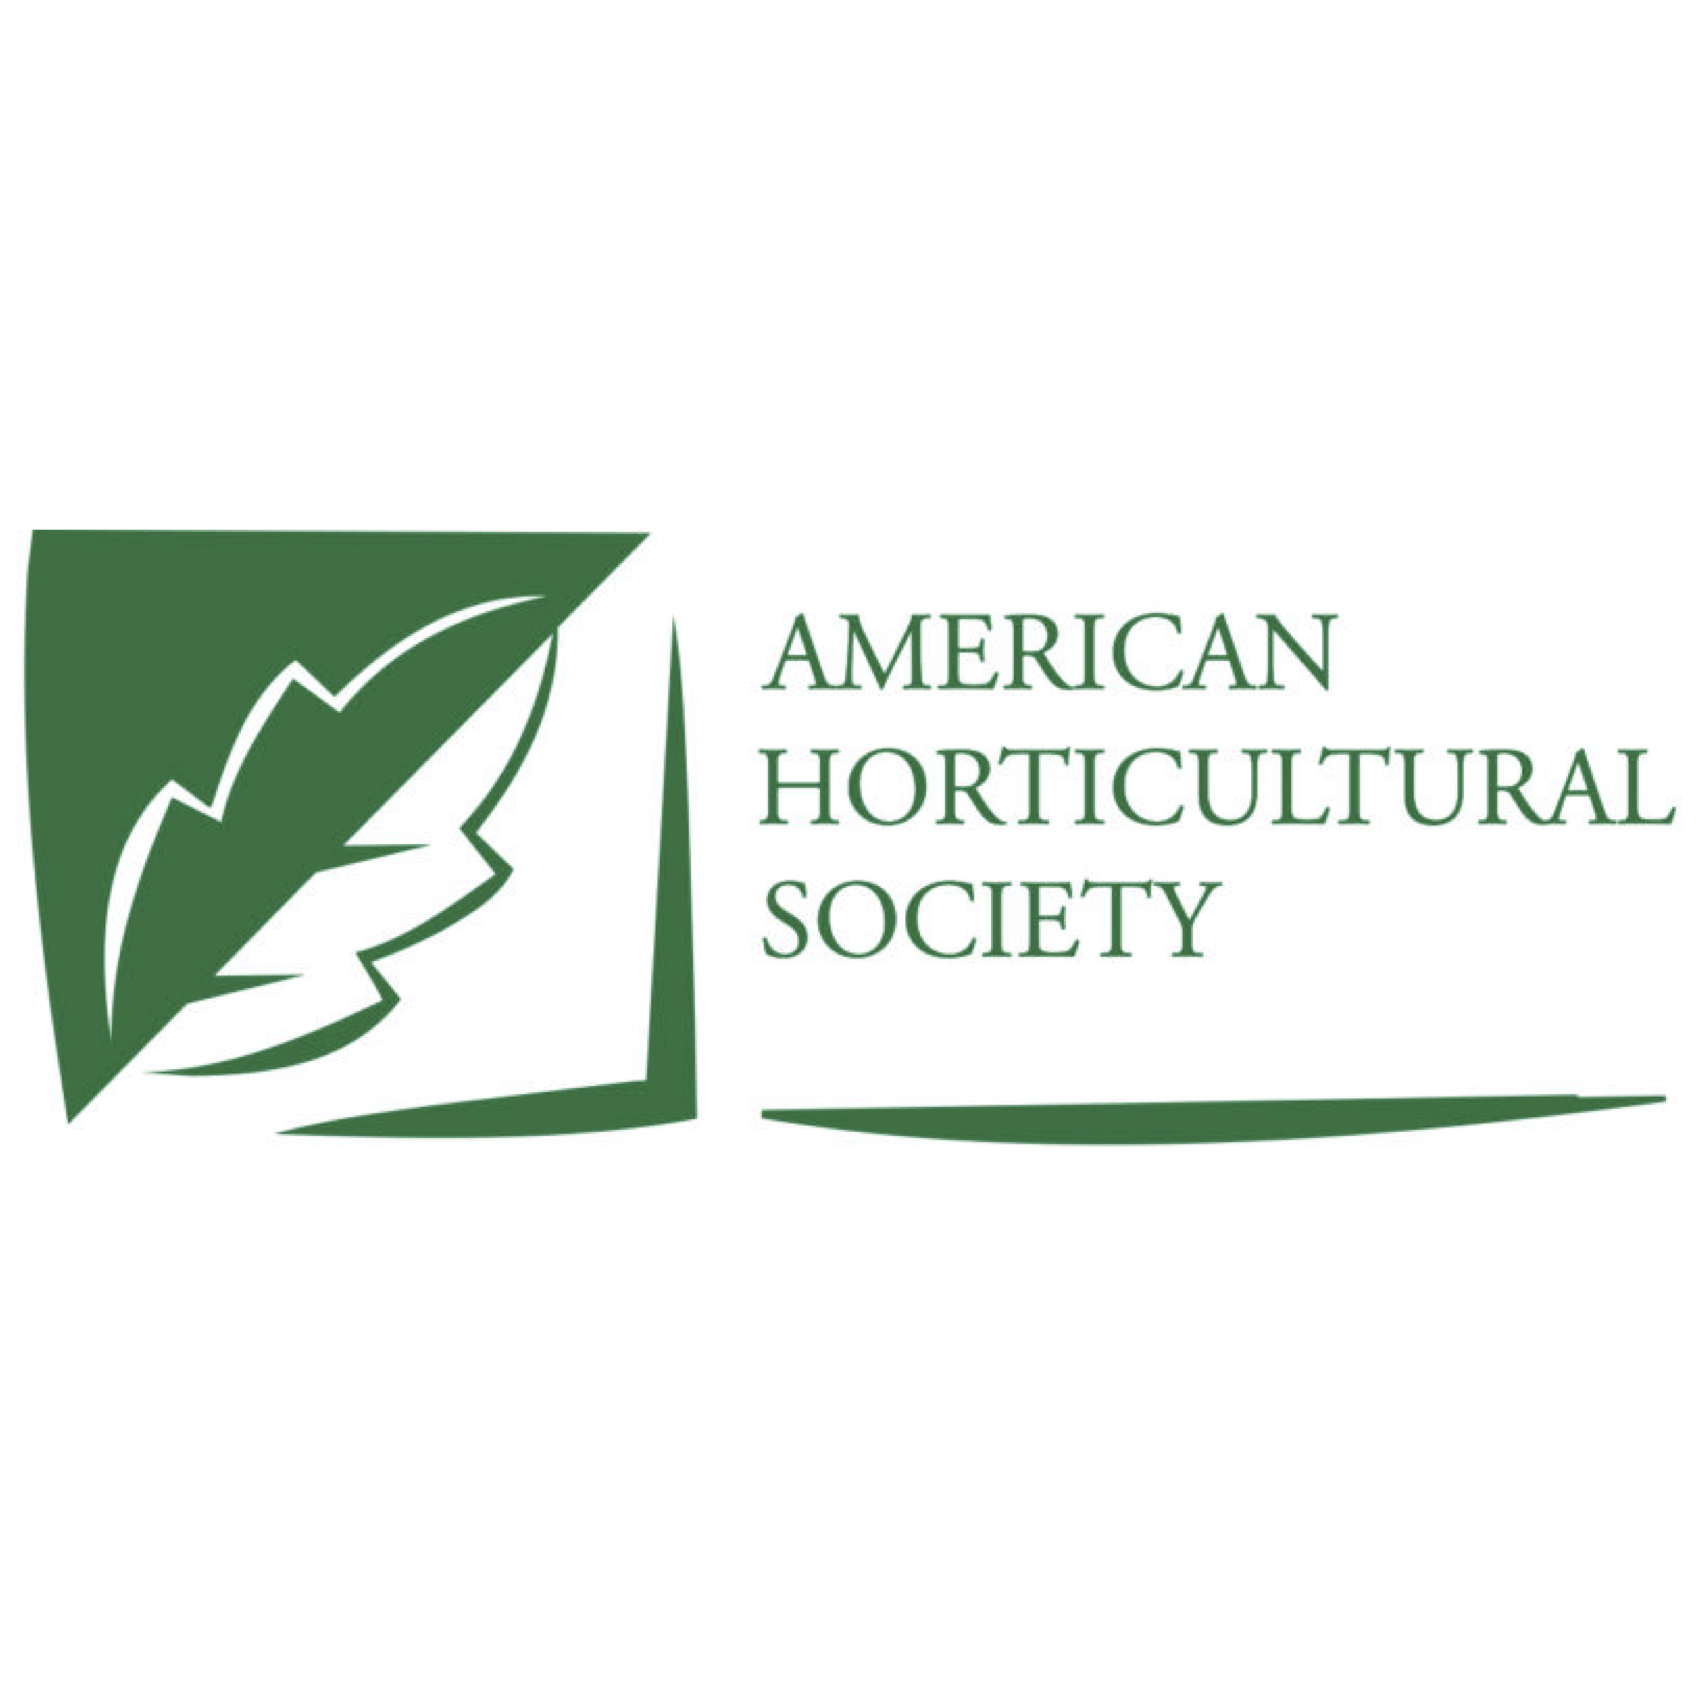 American Horticultural Society logo